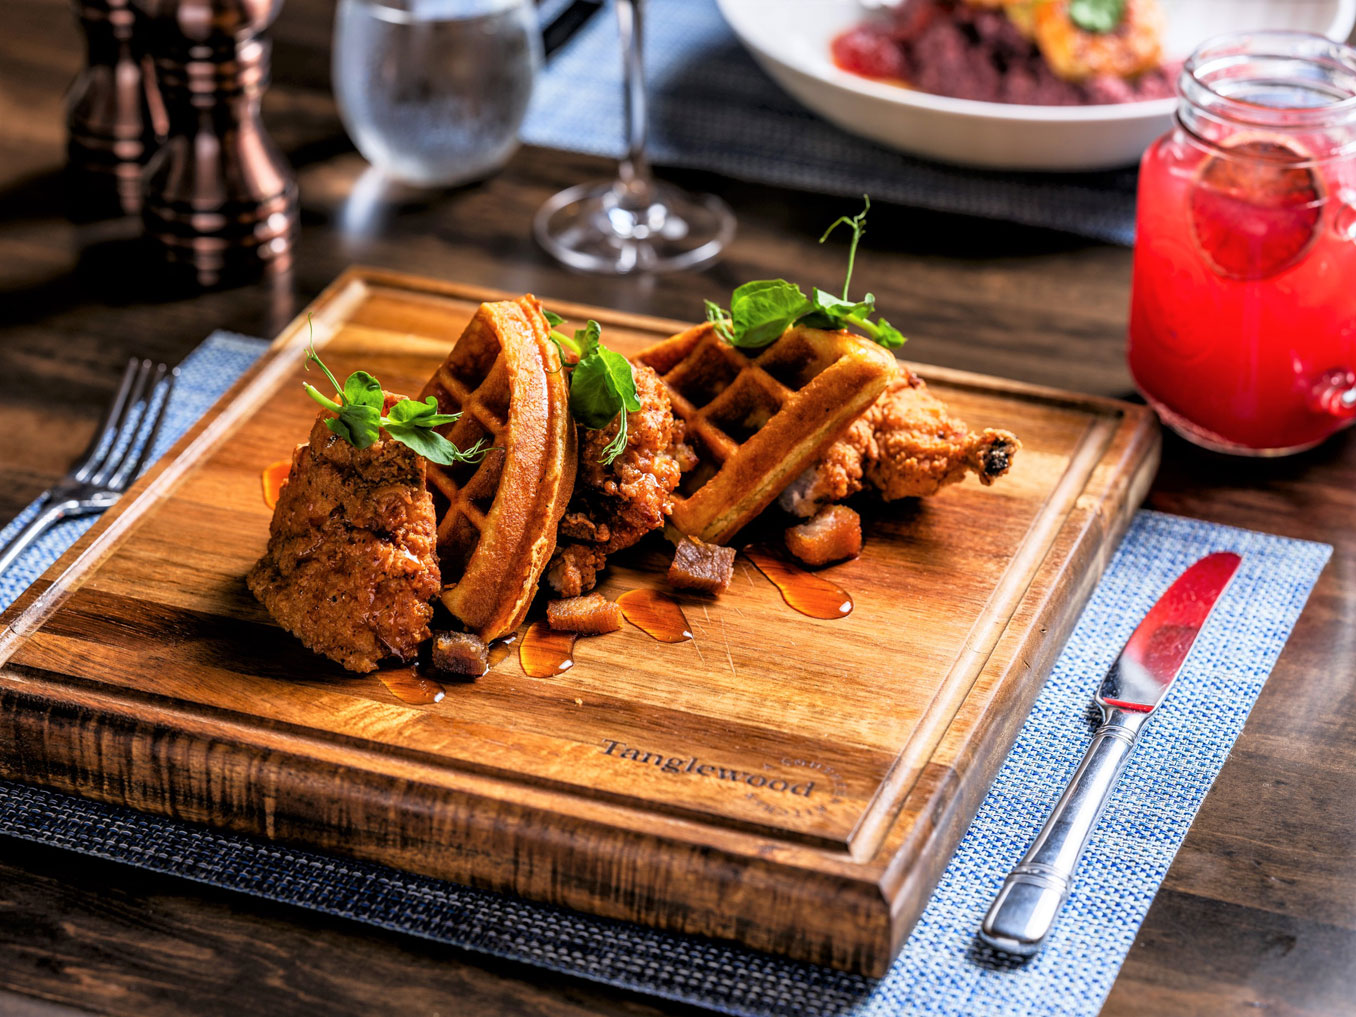 Chicken and Waffles at Tanglewood, A Southern Kitchen